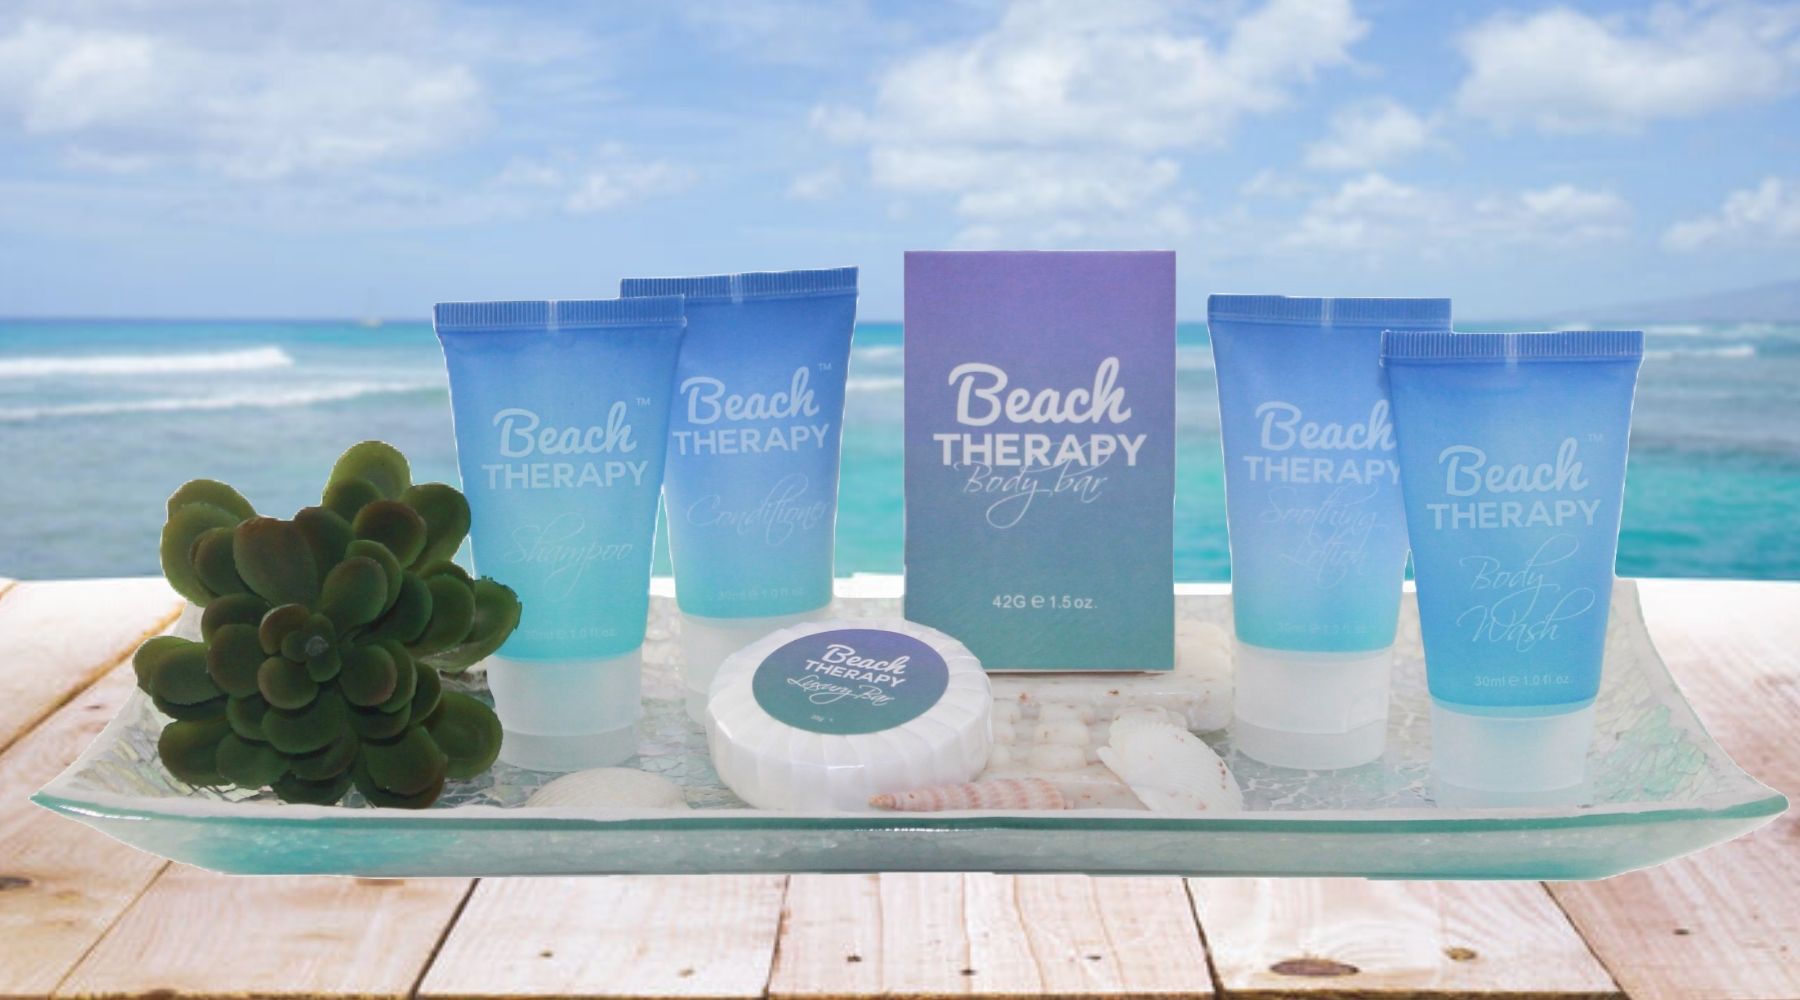 beach therapy hotel soaps and amenities